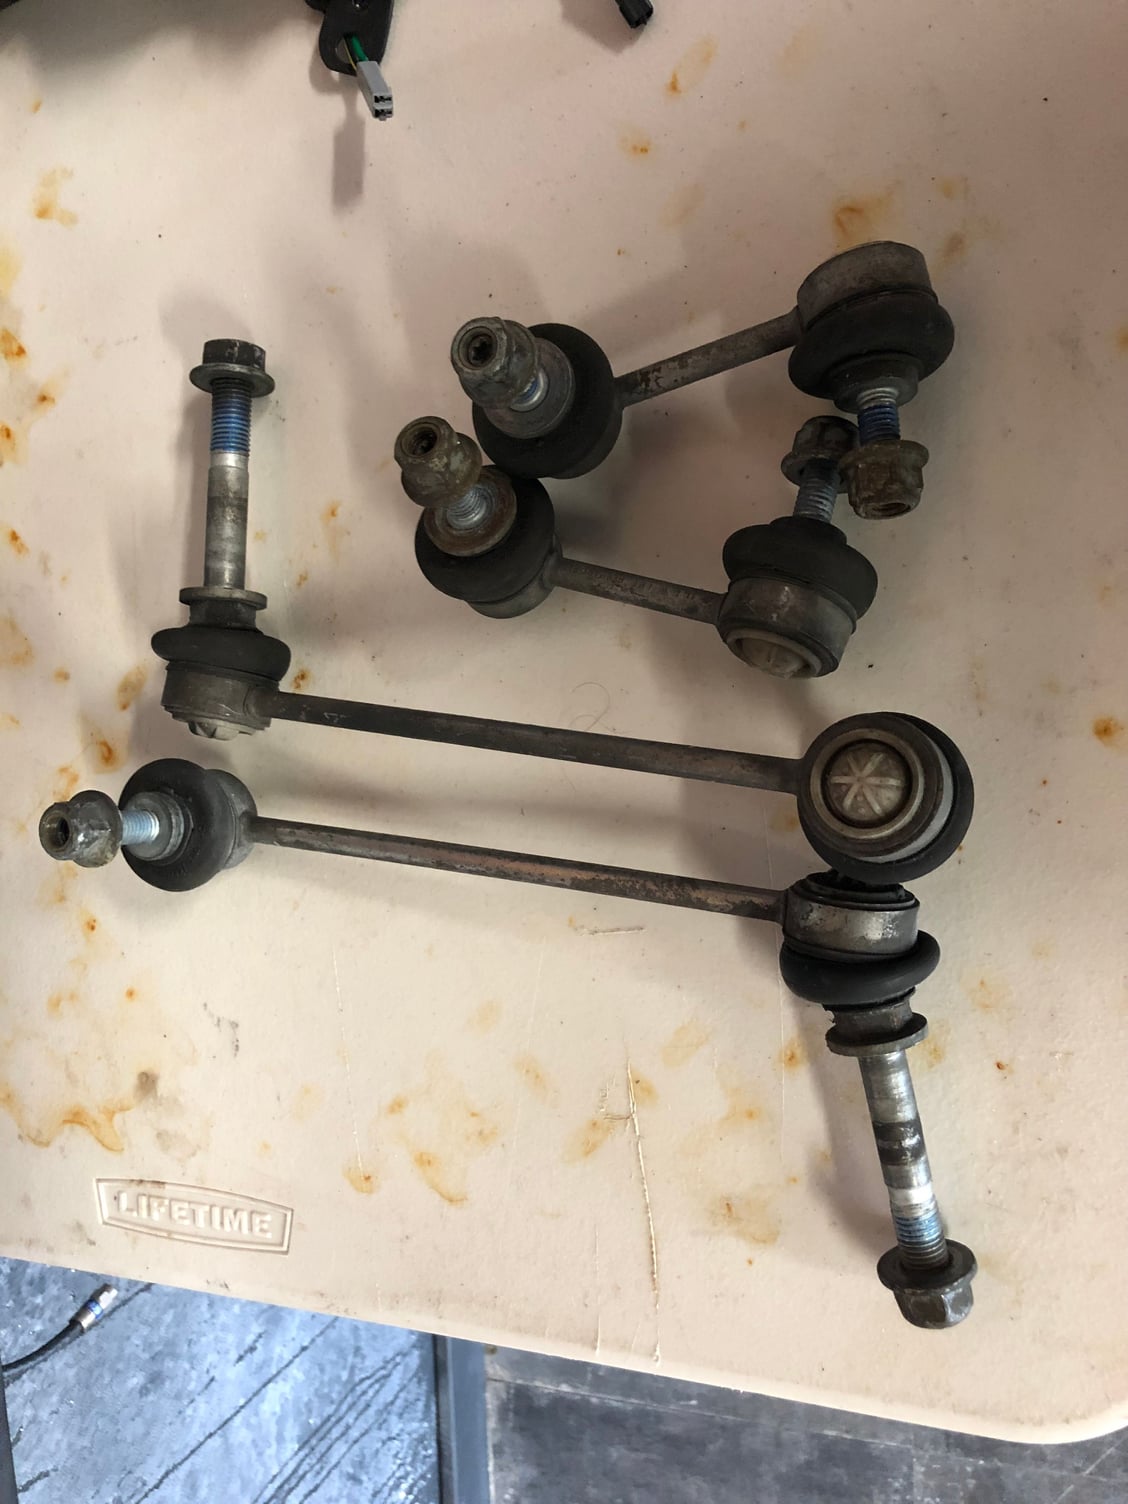 Steering/Suspension - 997.1 parts - Used - 2005 to 2011 Porsche 911 - Longwood, FL 32779, United States